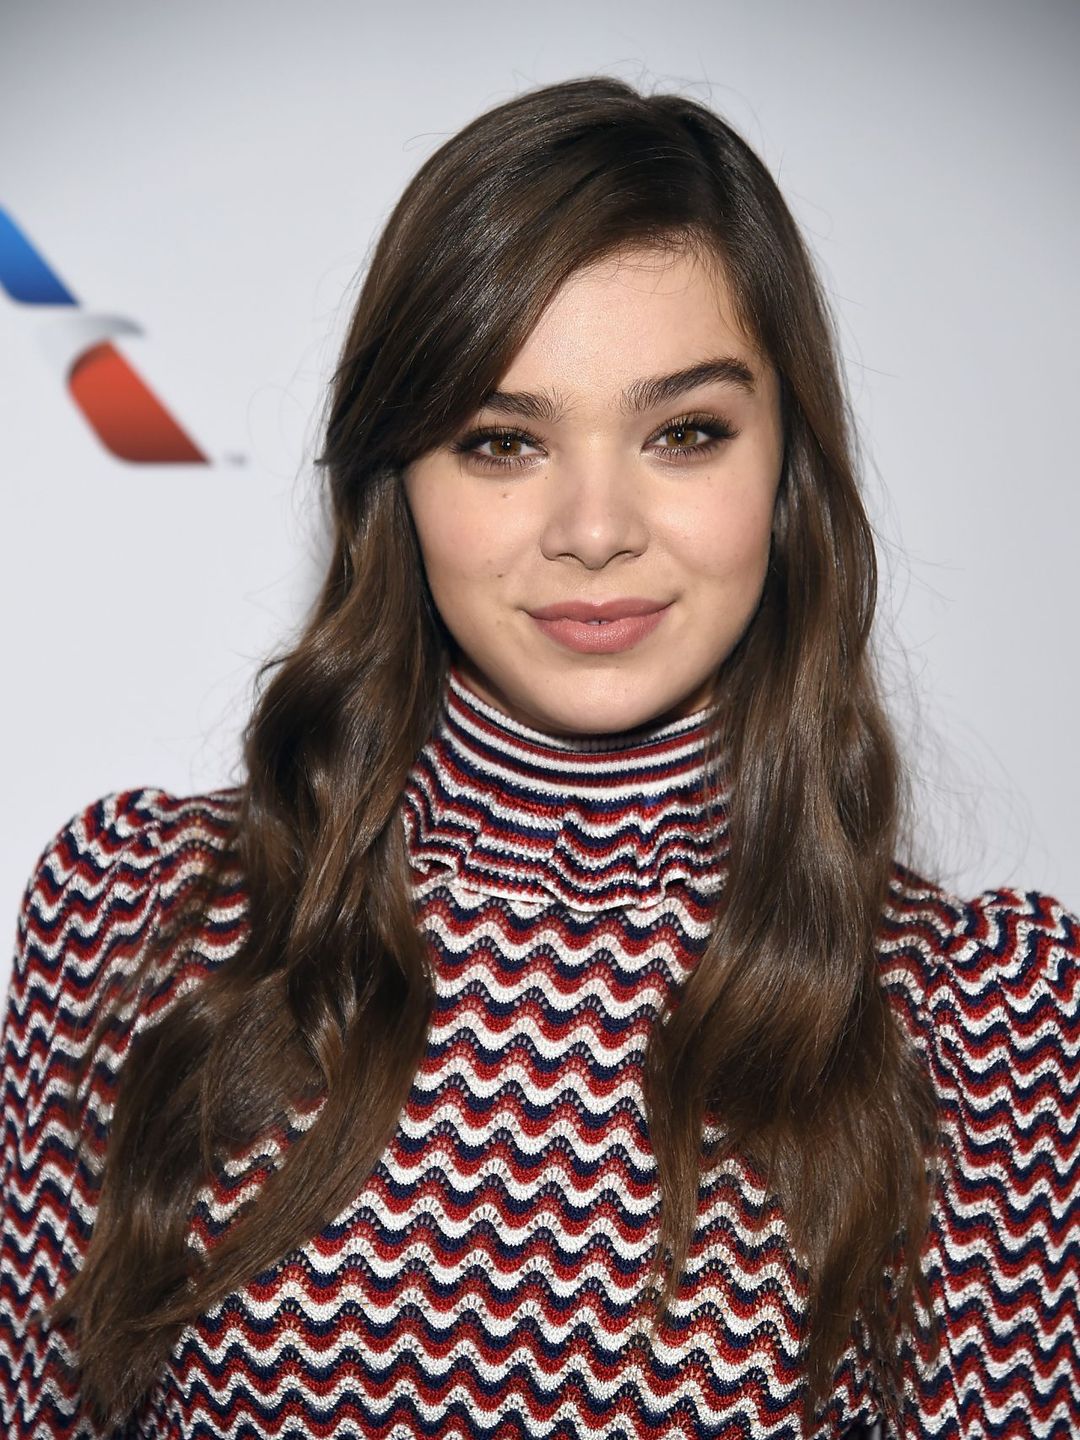 Hailee Steinfeld young pics